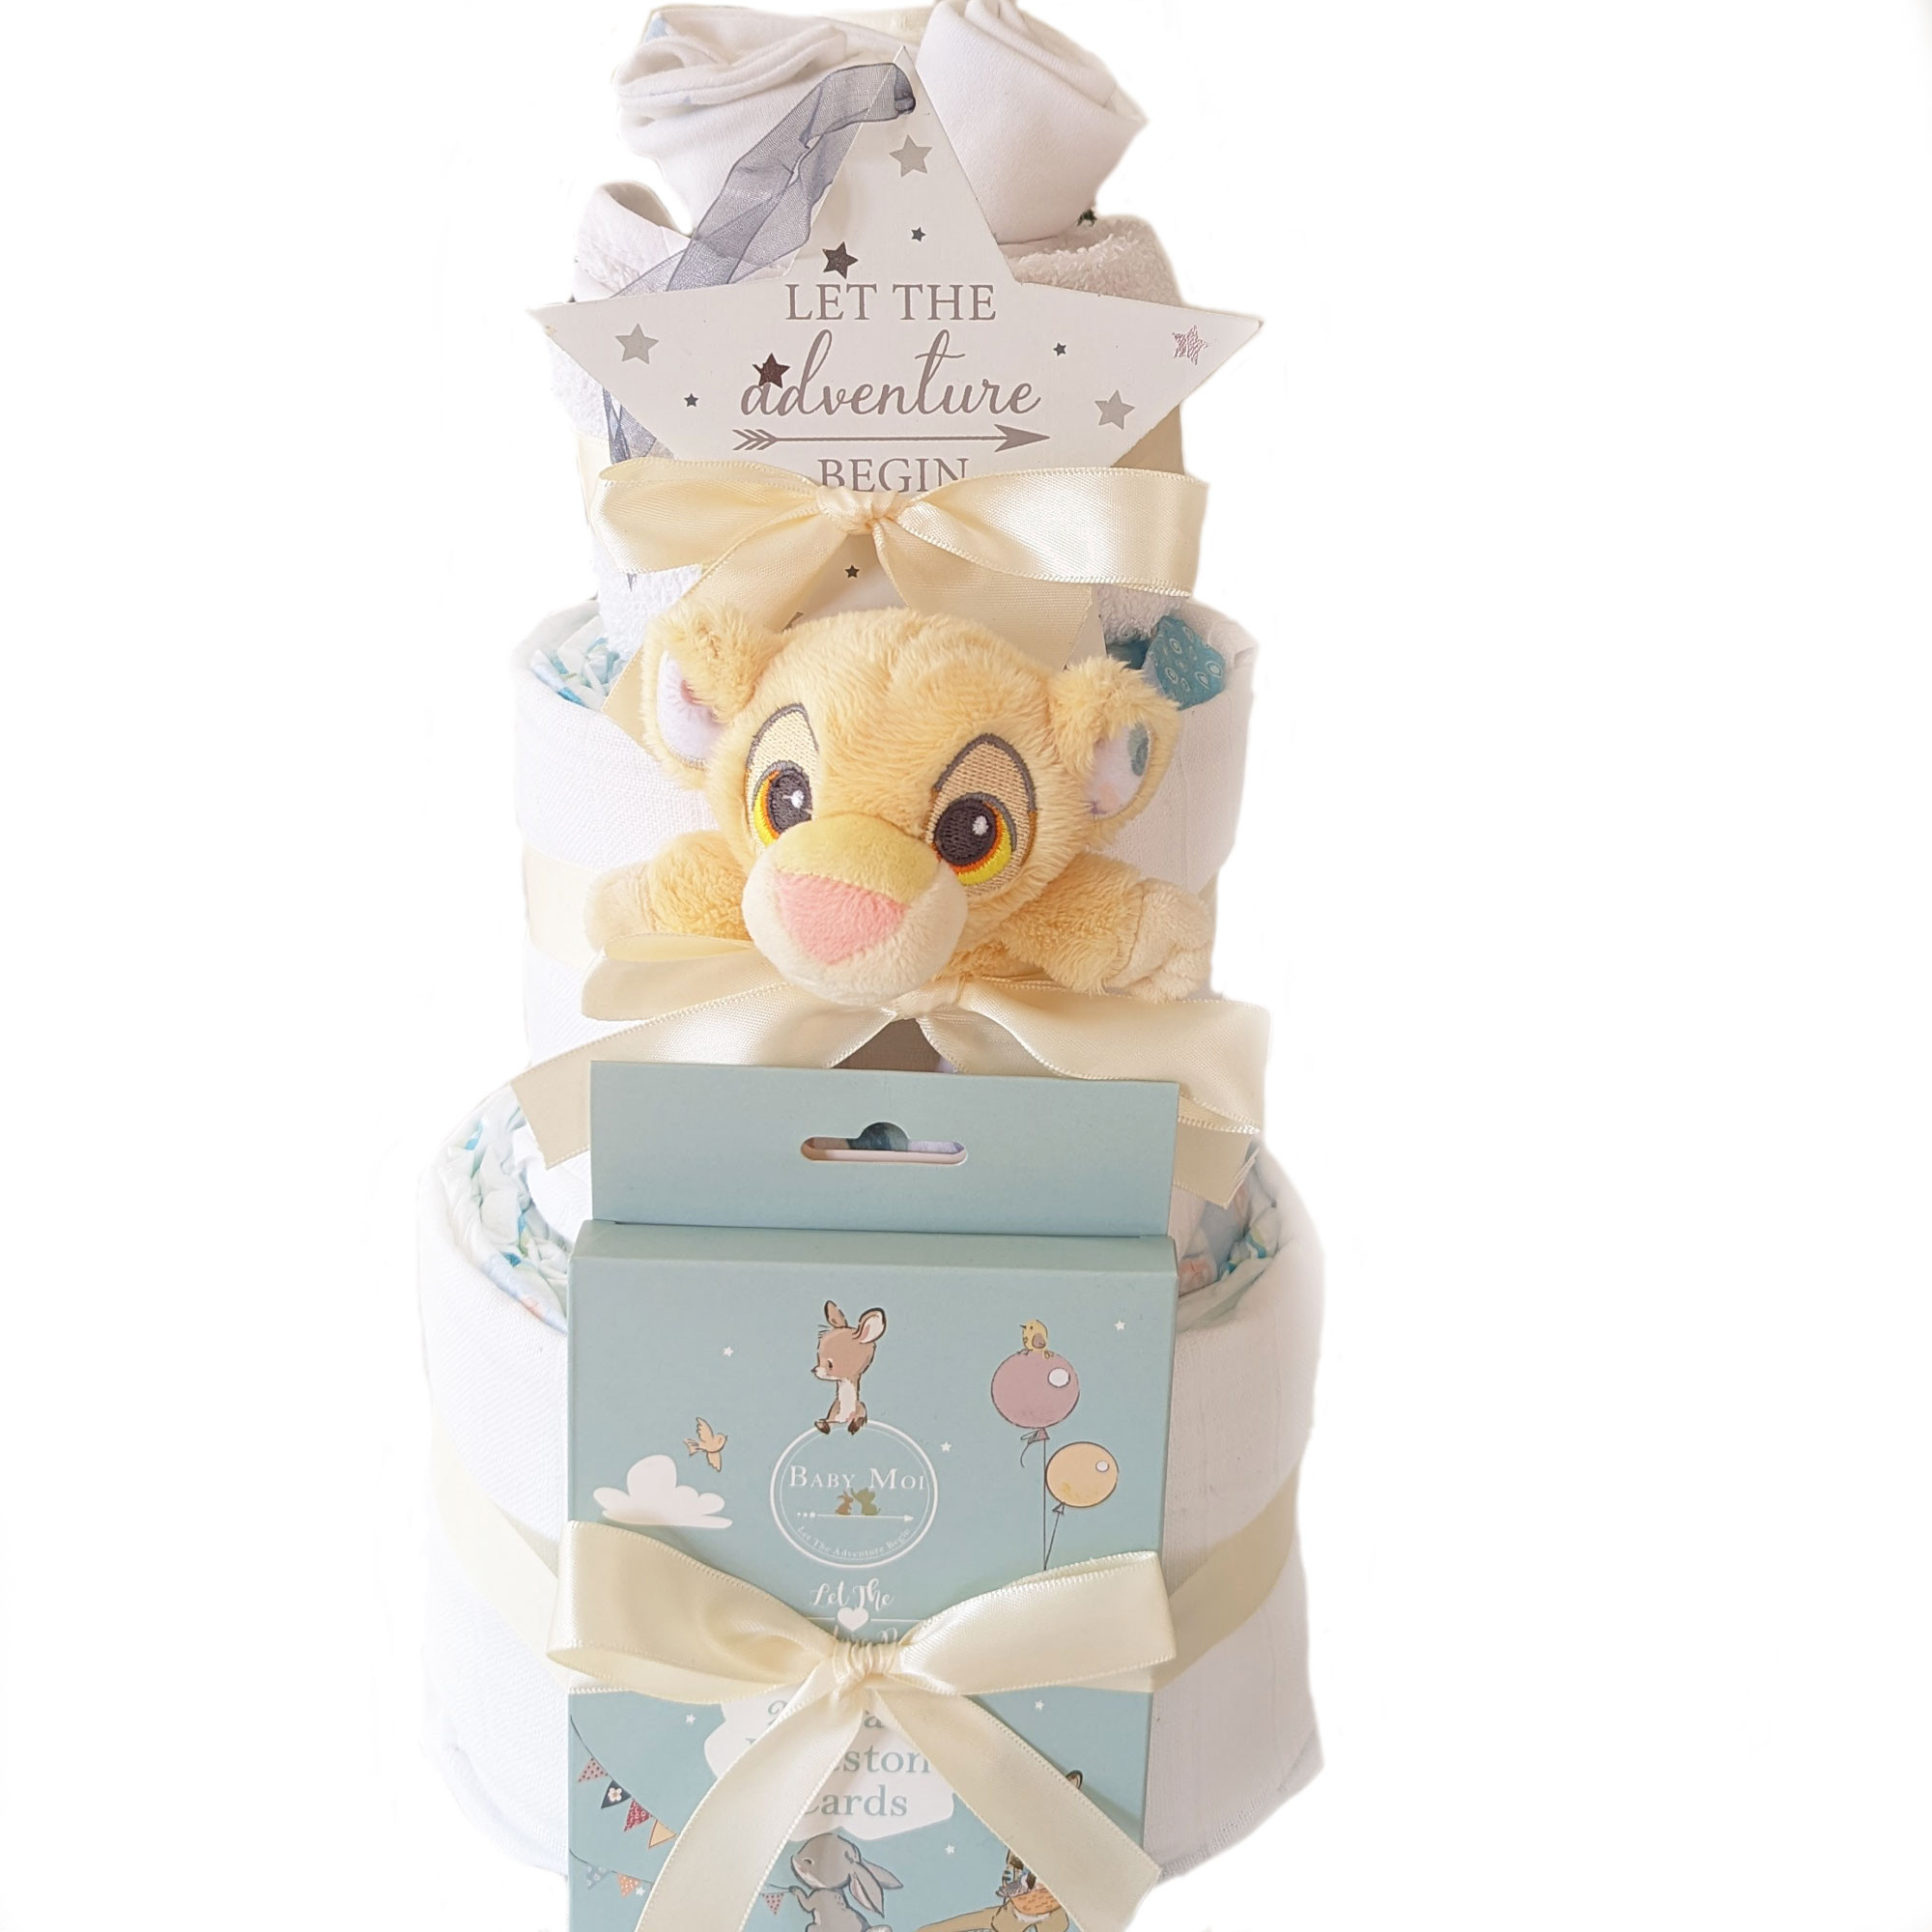 3 Tier New Born Baby Gift Nappy Cake Lion King